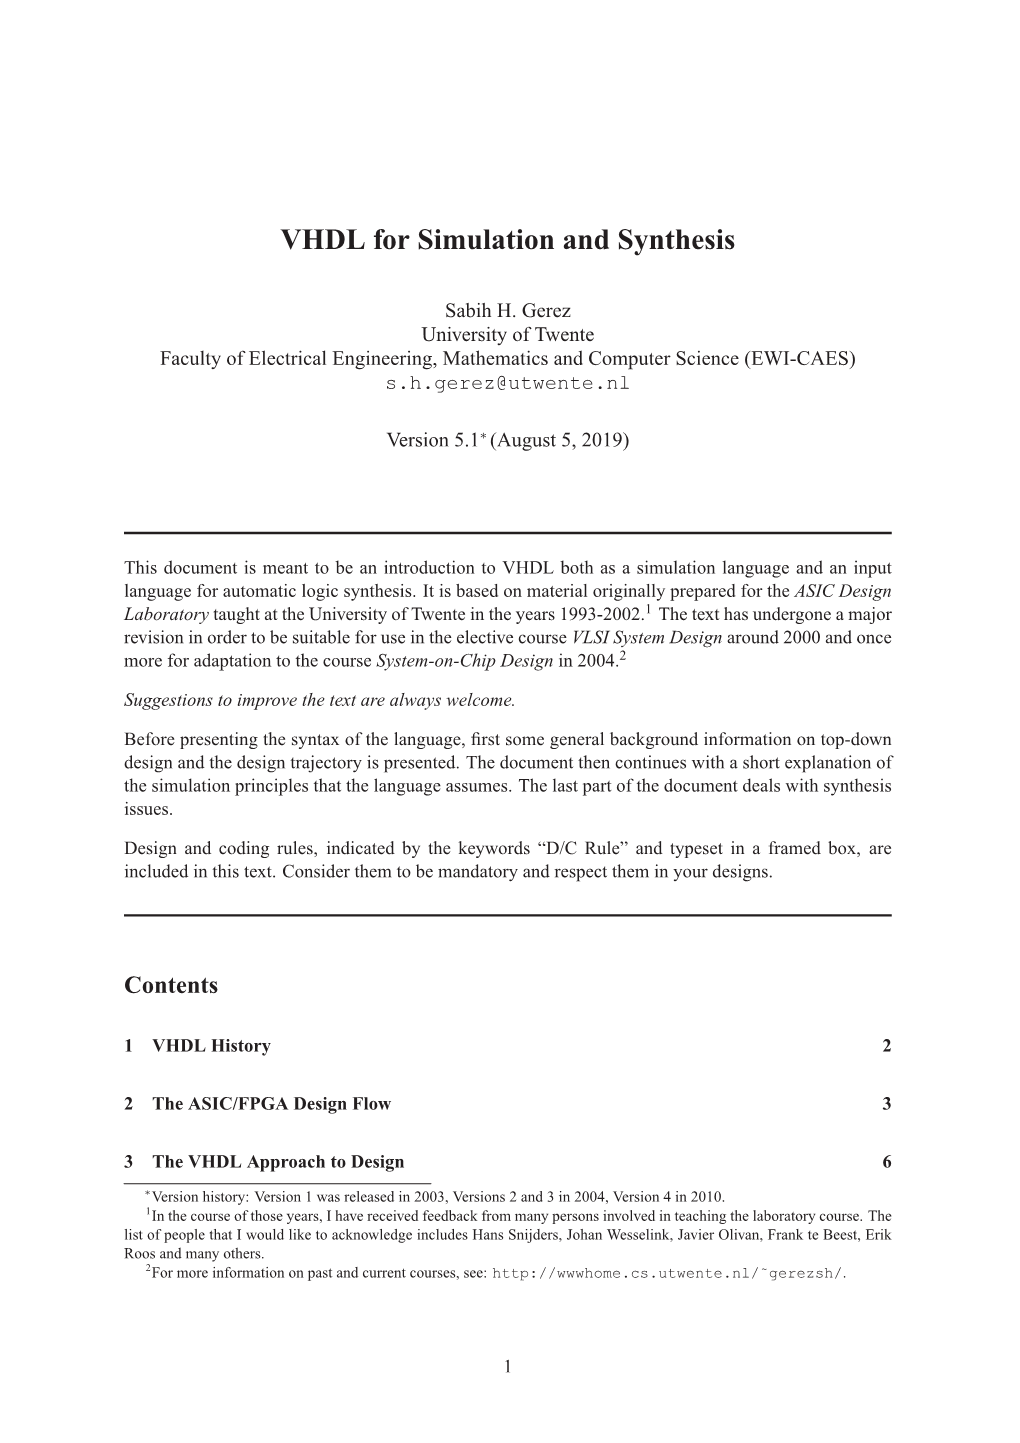 VHDL for Simulation and Synthesis